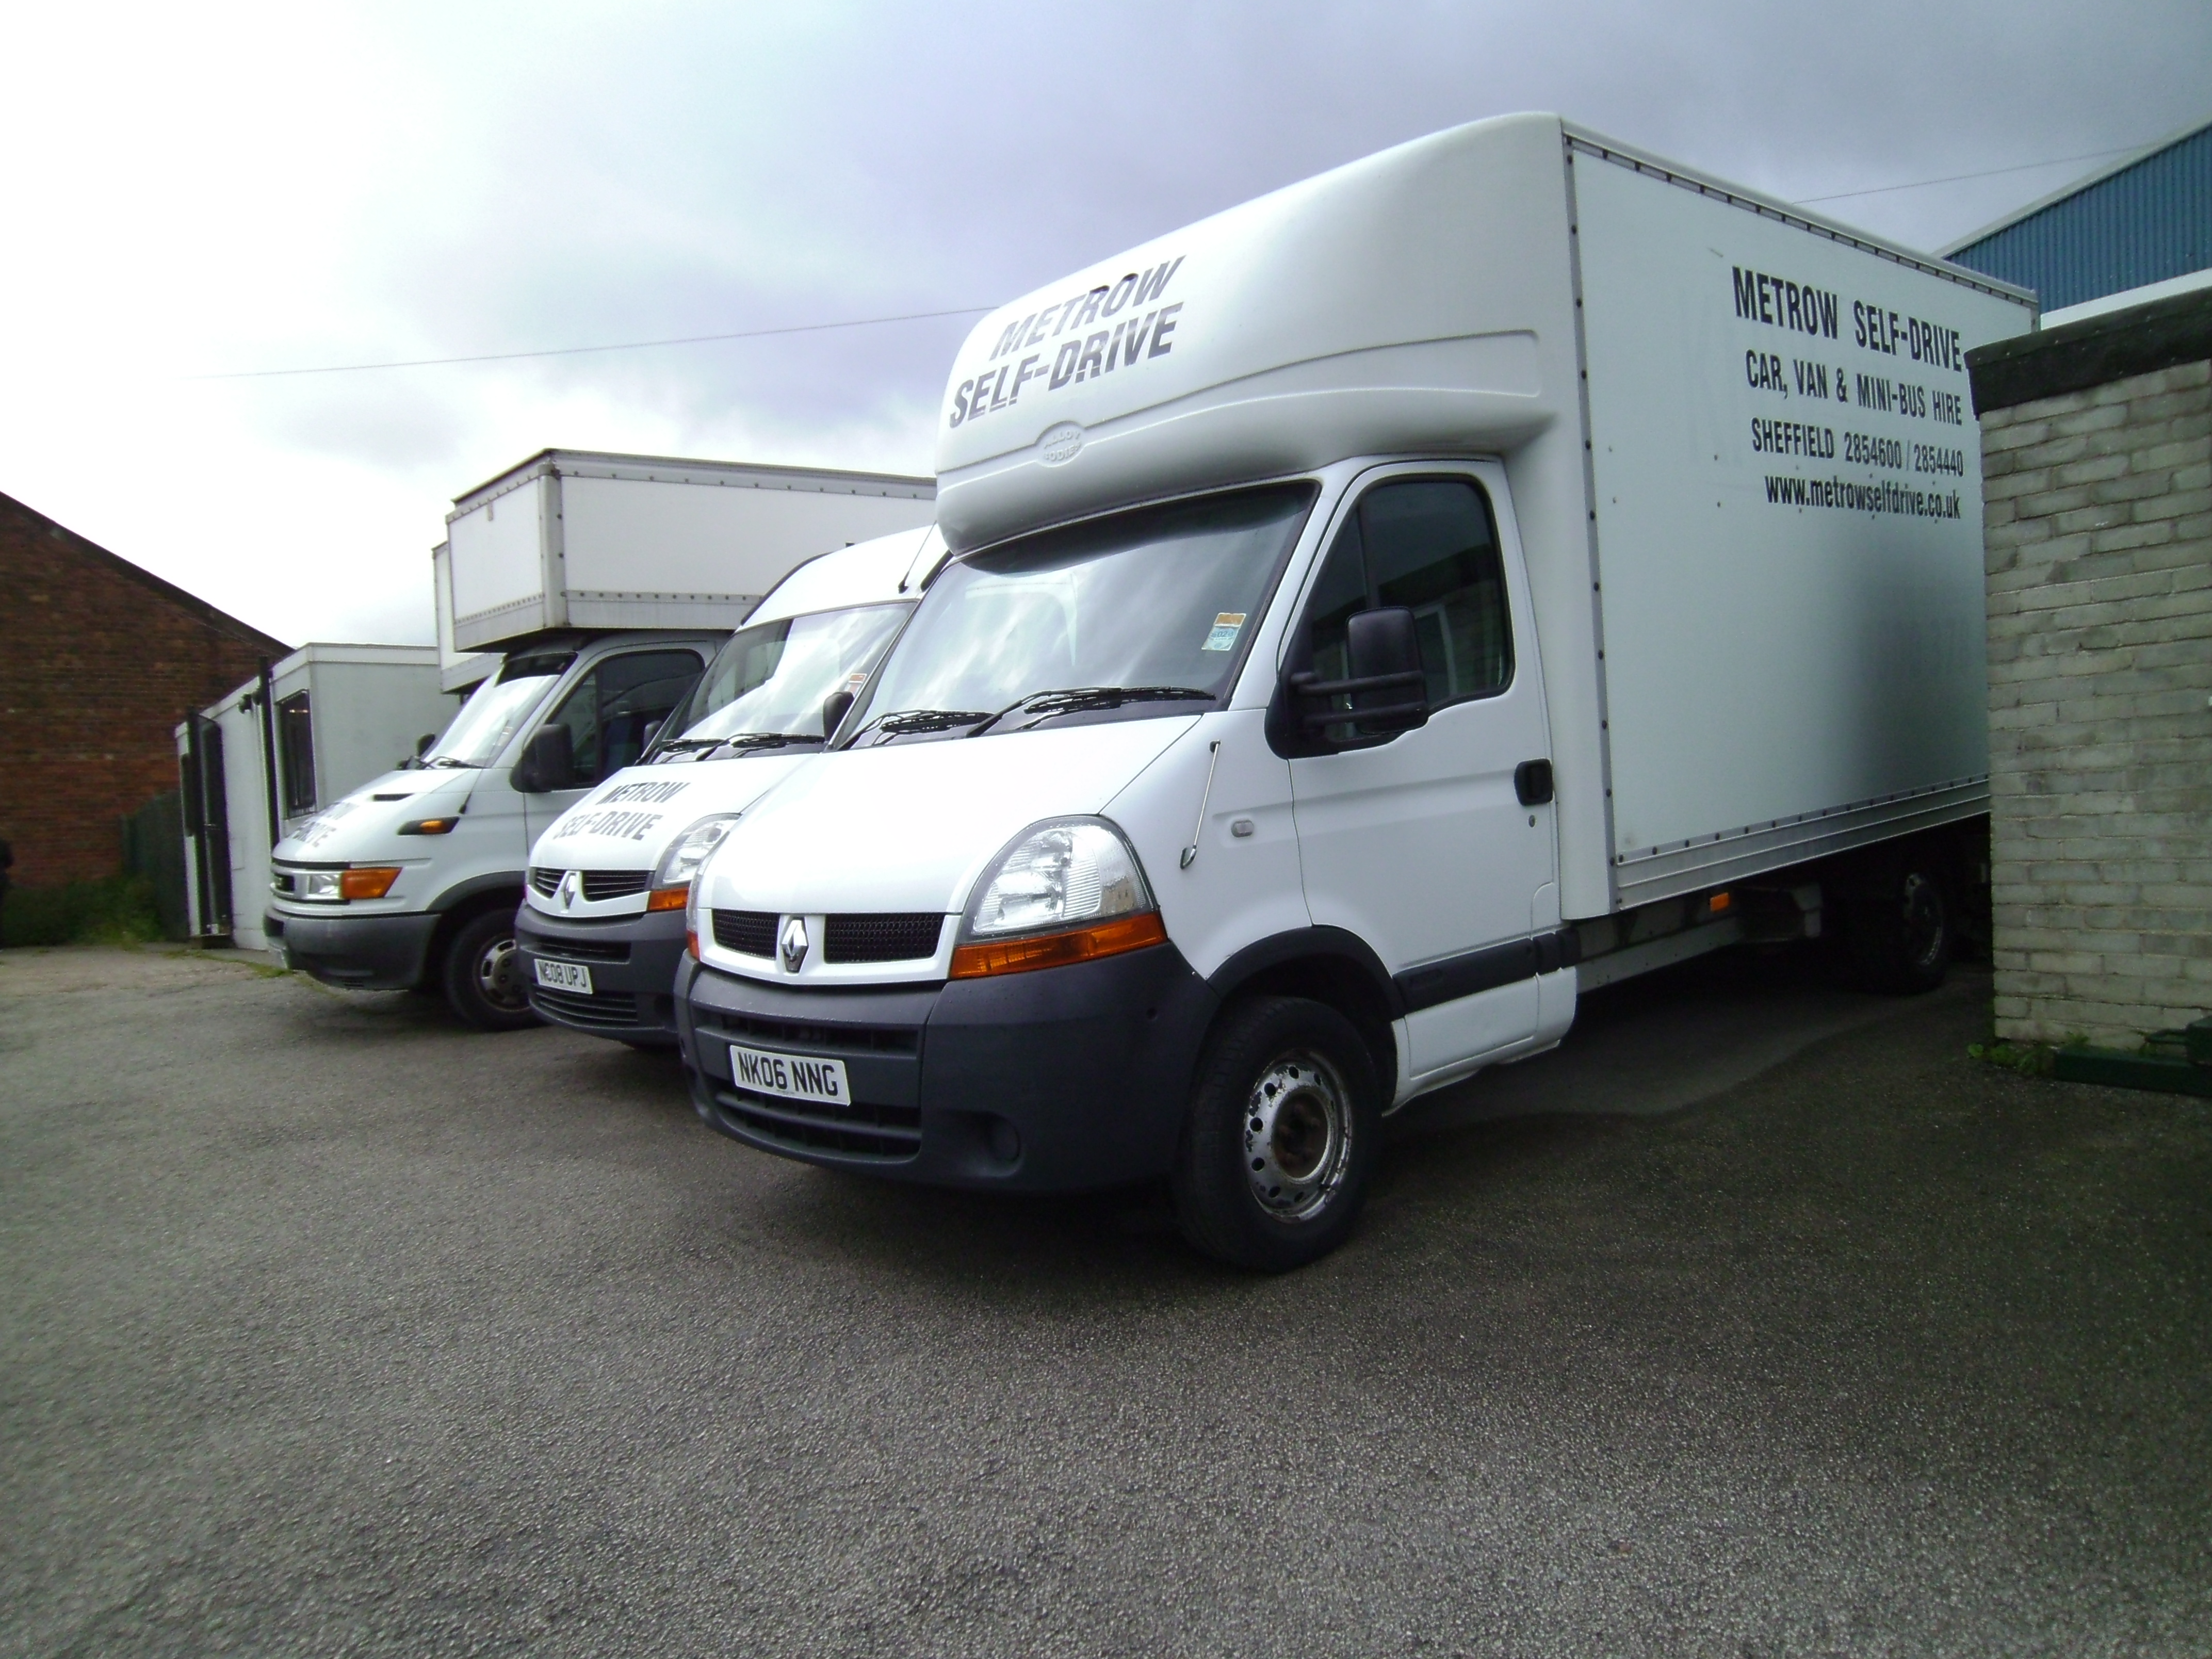 Some of our vans